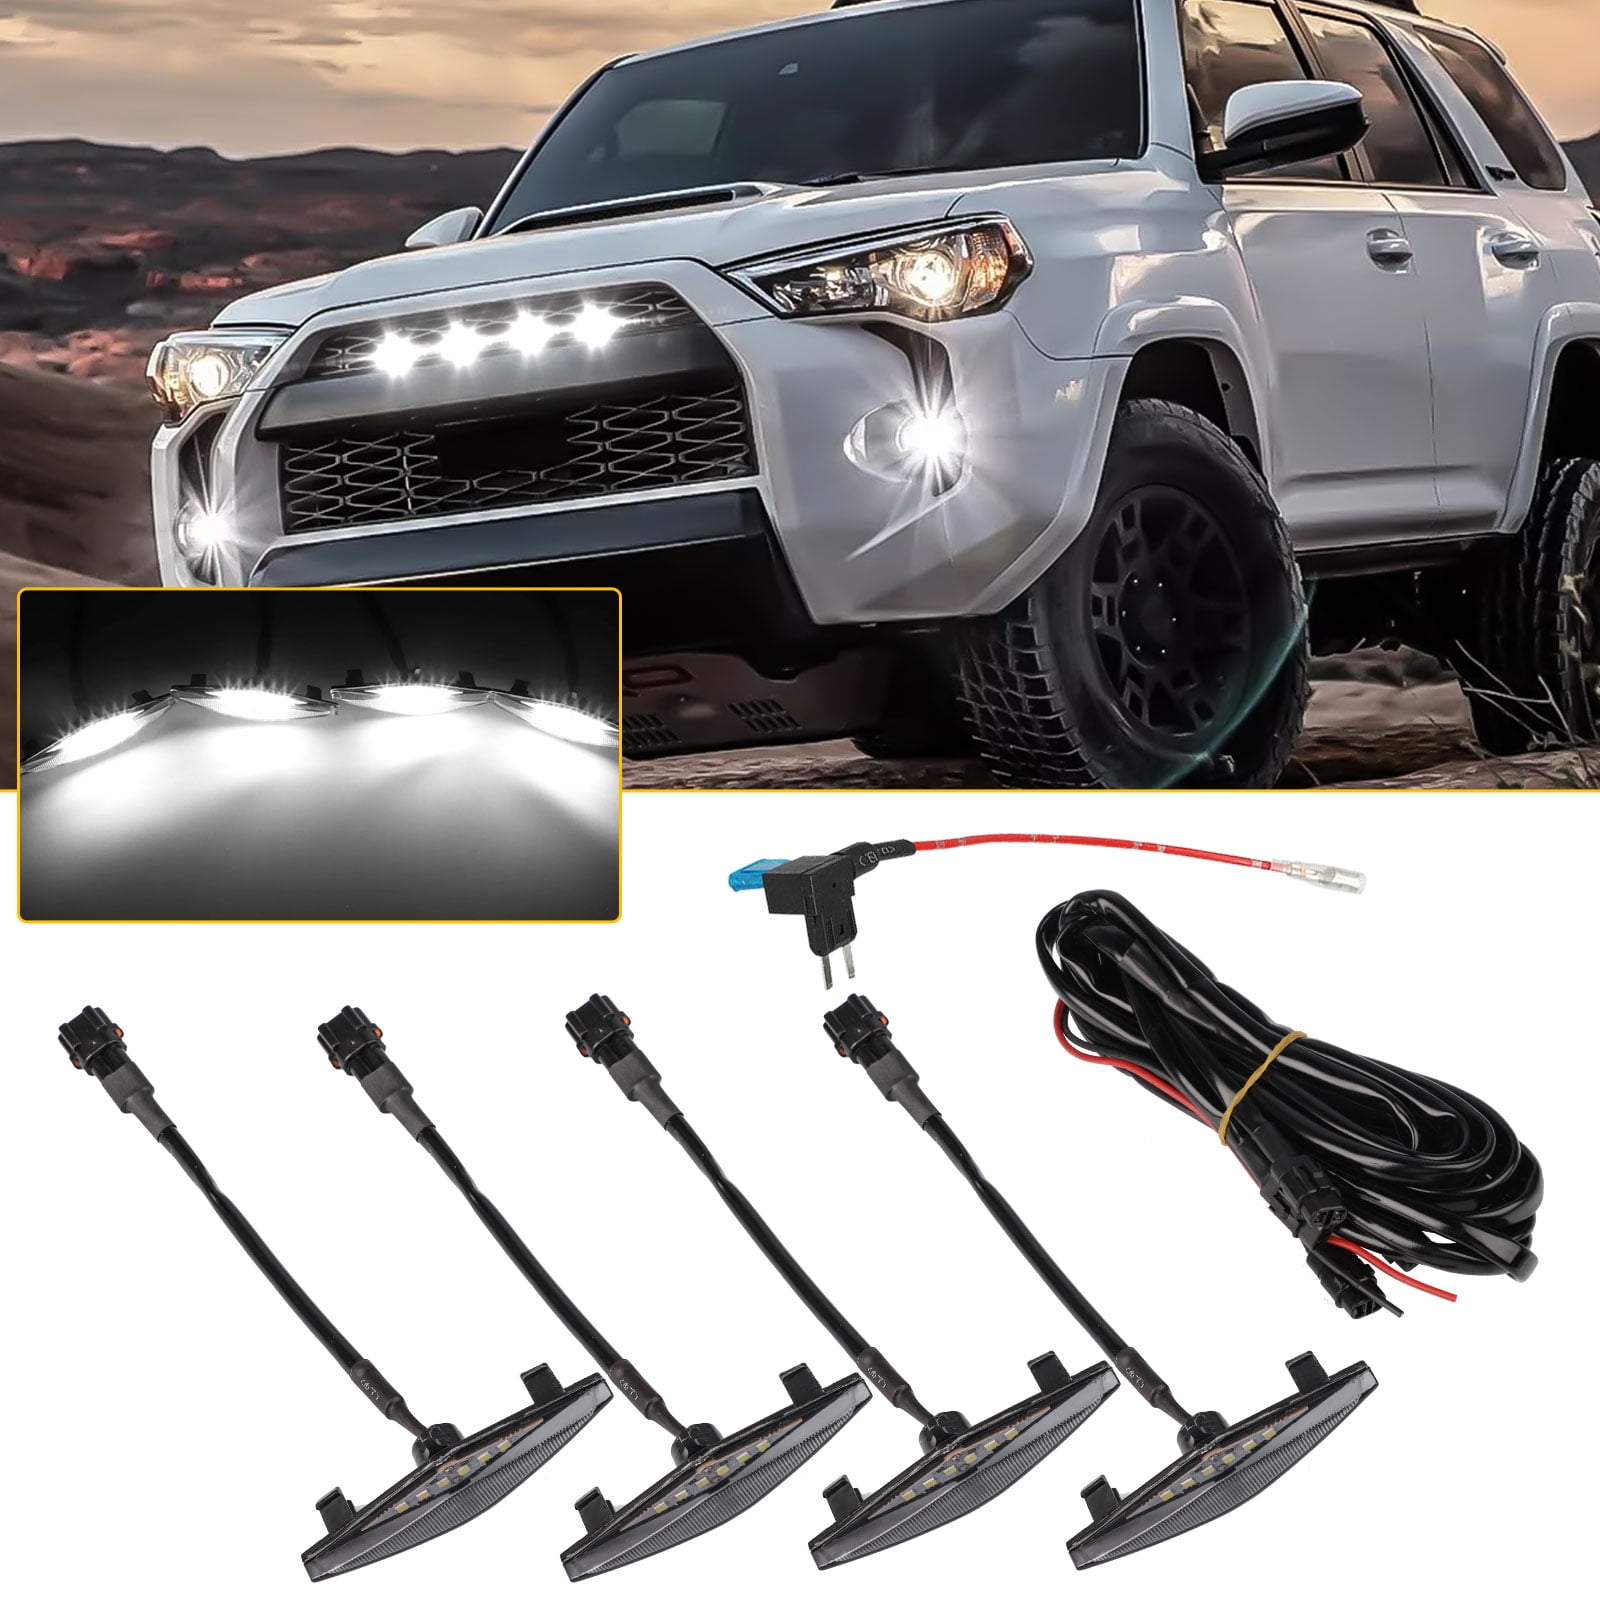 FUNGORGT 4Runner Led Amber Grille Lights Kits for 4Runner TRD Pro 2014 2015 2016 2017 2018 2019,4 PCS 4Runner Led Amber Lights kit White Fuse Adapter&The Wiring Harnes 